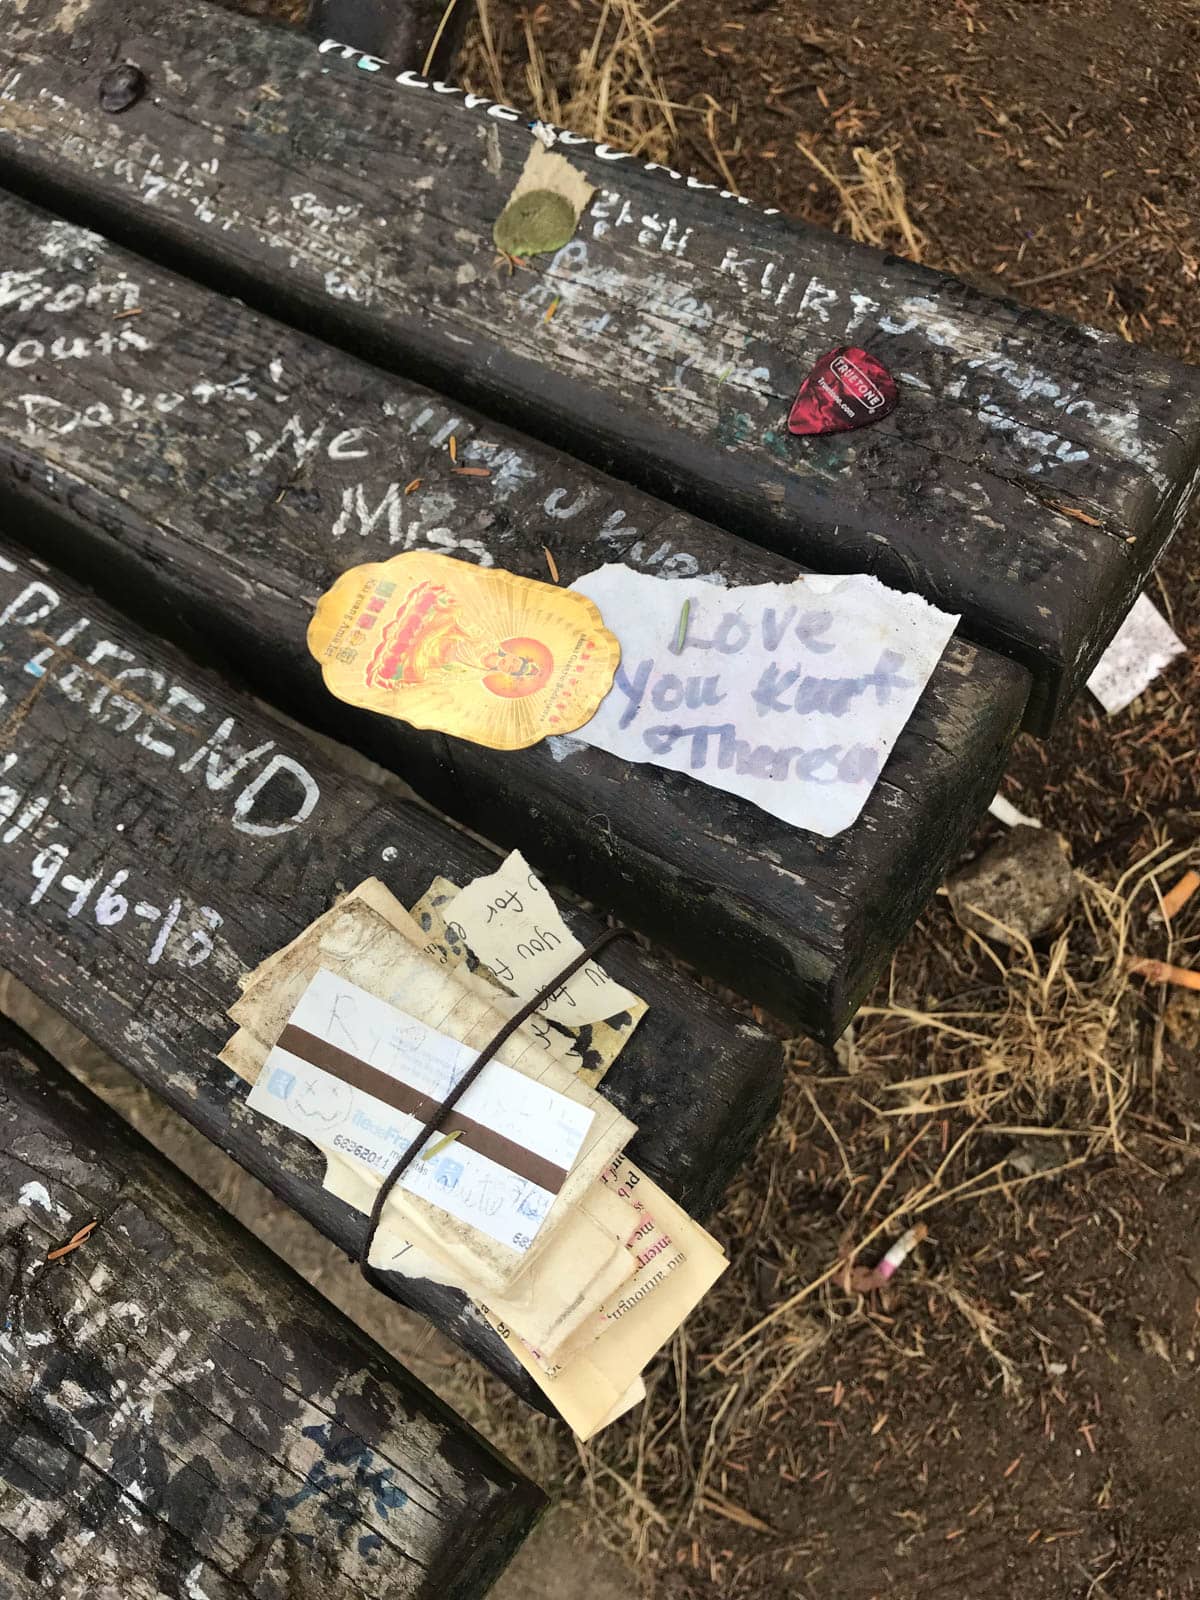 A close up of a bench with some writing painted on it in white, â€œWe miss youâ€�, â€œlegendâ€�, and some handwritten notes tied to the bench, one reading â€œLove you Kurtâ€�.